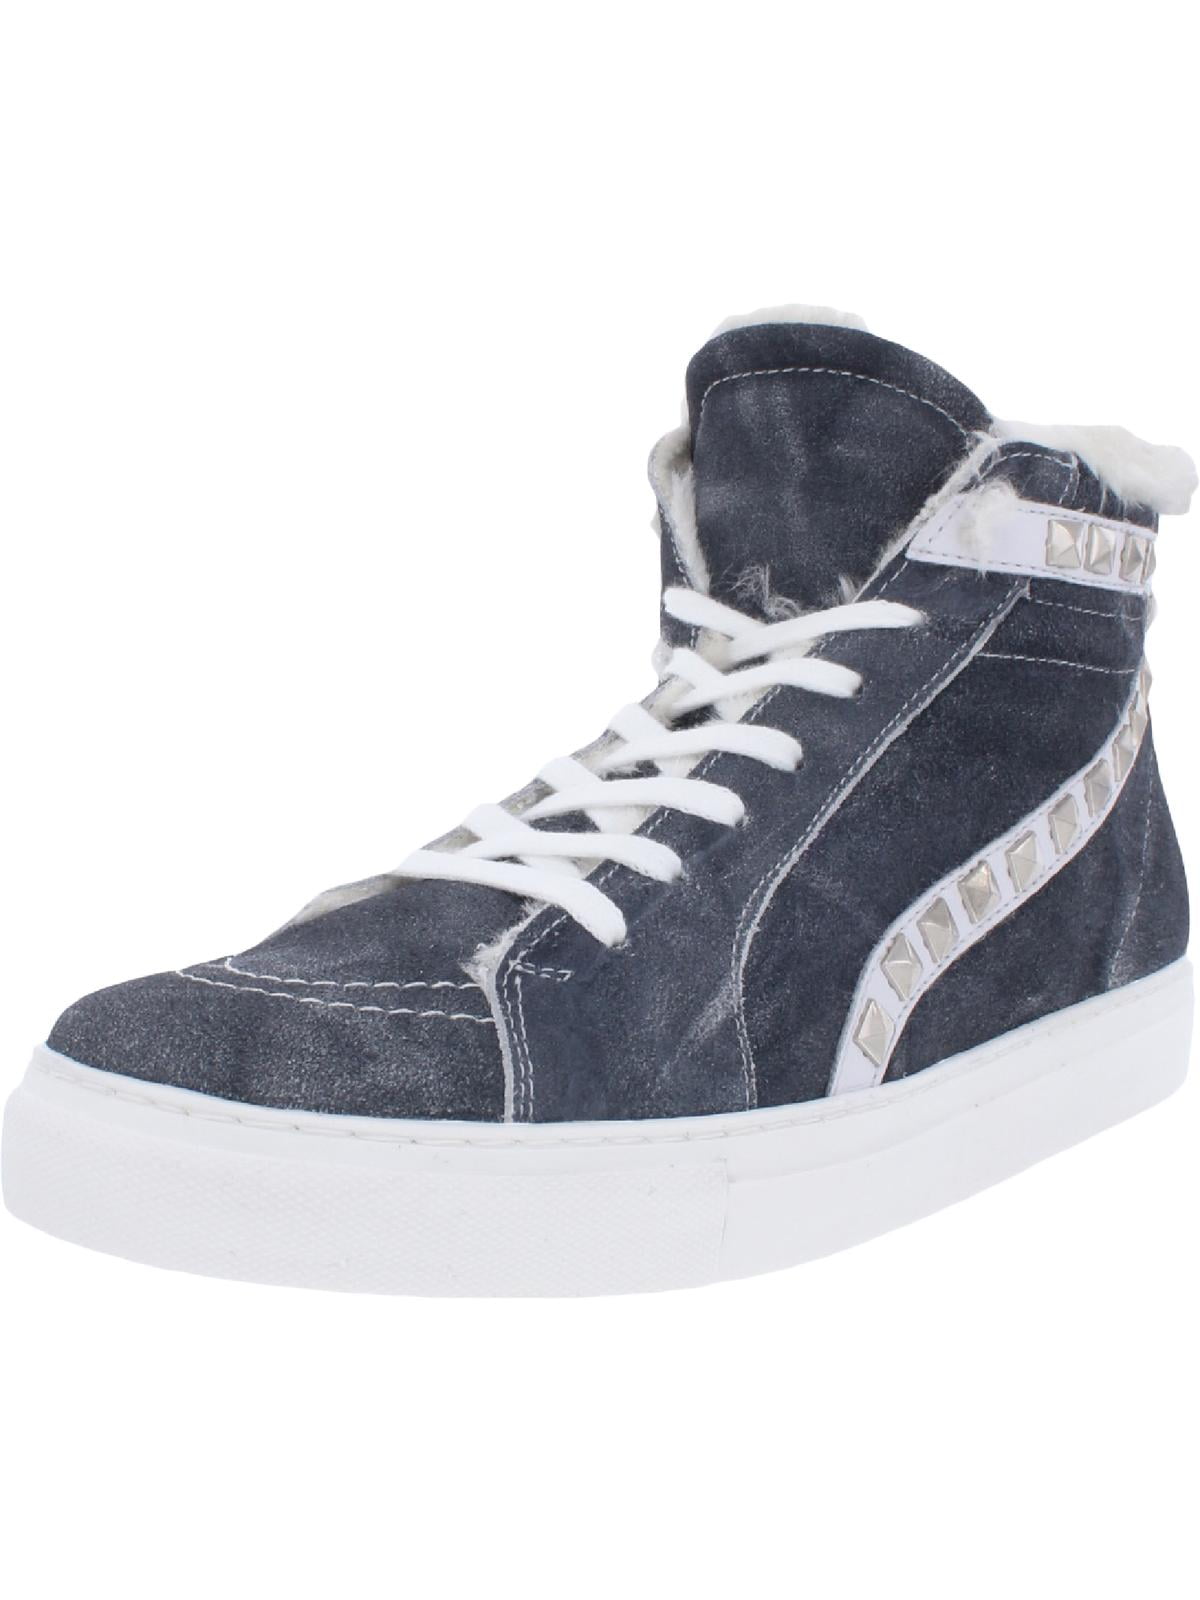 Steve Madden Lancer Womens 5 Denim Blue Lace Up Canvas Fashion Sneakers |  Sneakers fashion, Blue denim, Lace up